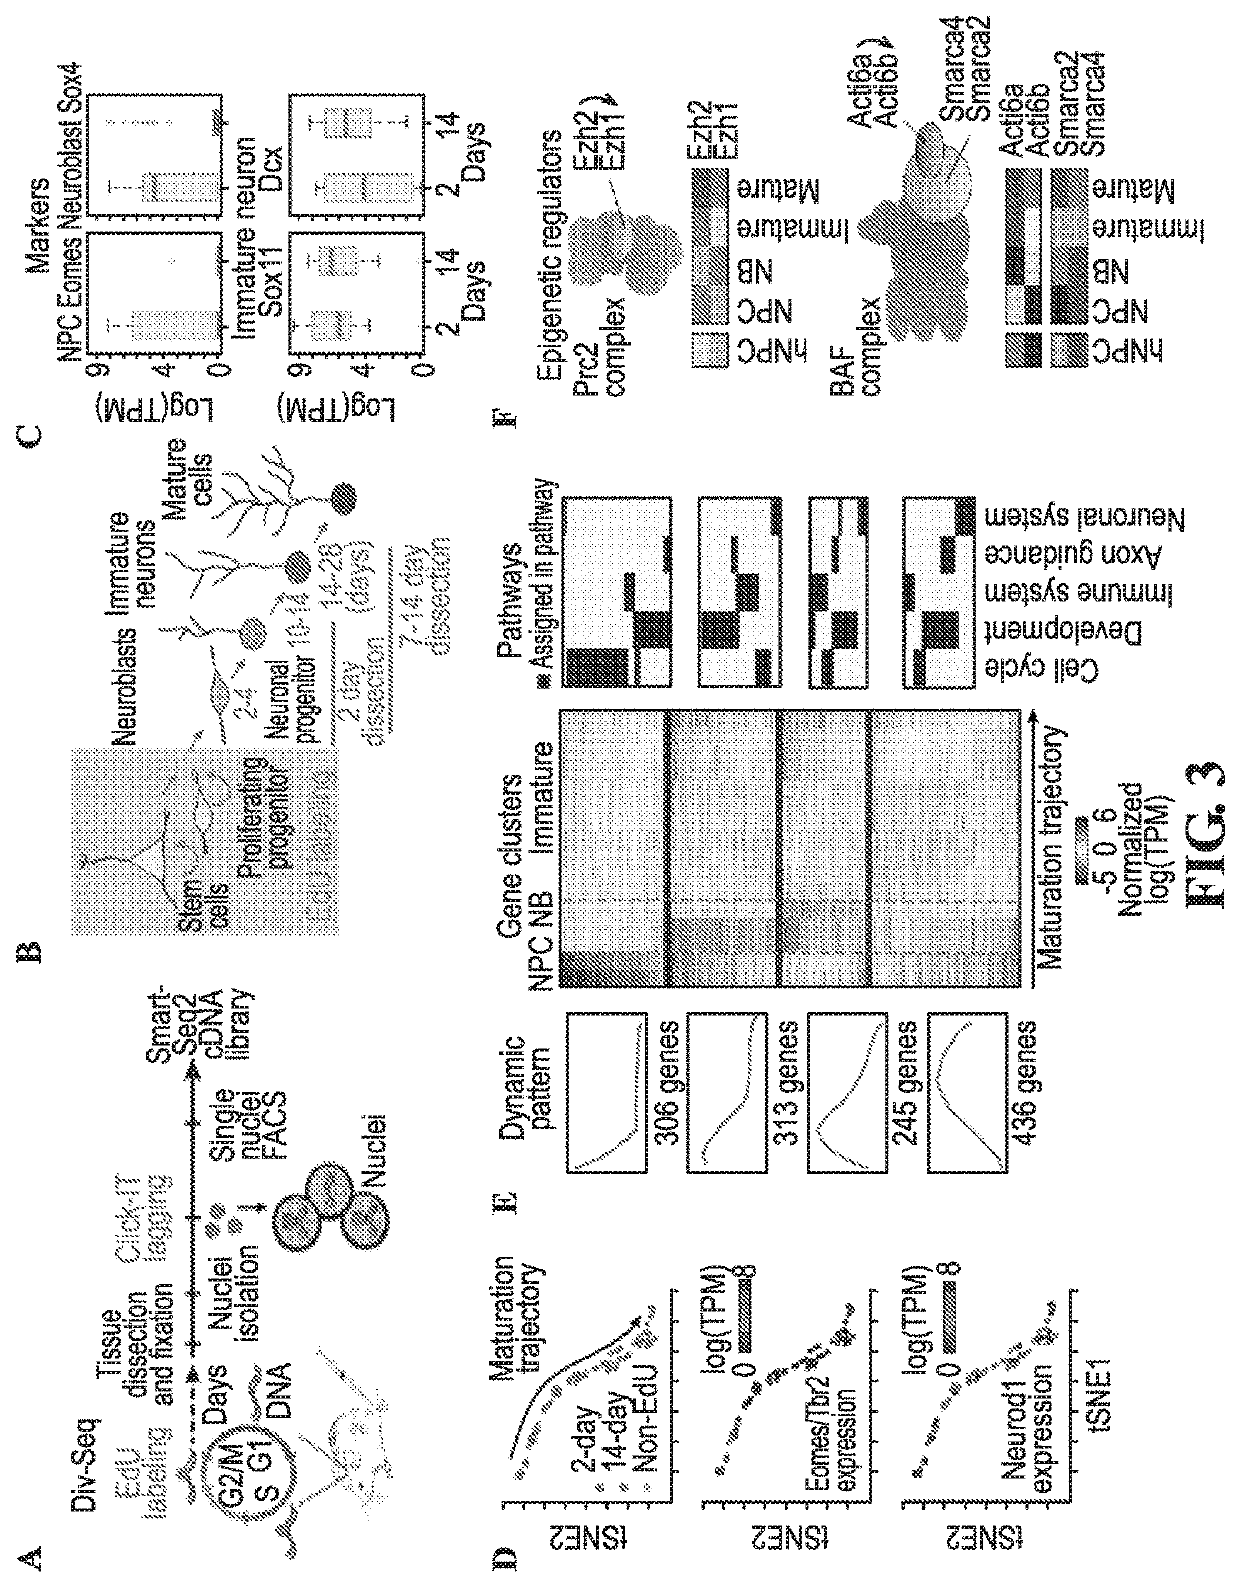 Methods for determining spatial and temporal gene expression dynamics during adult neurogenesis in single cells